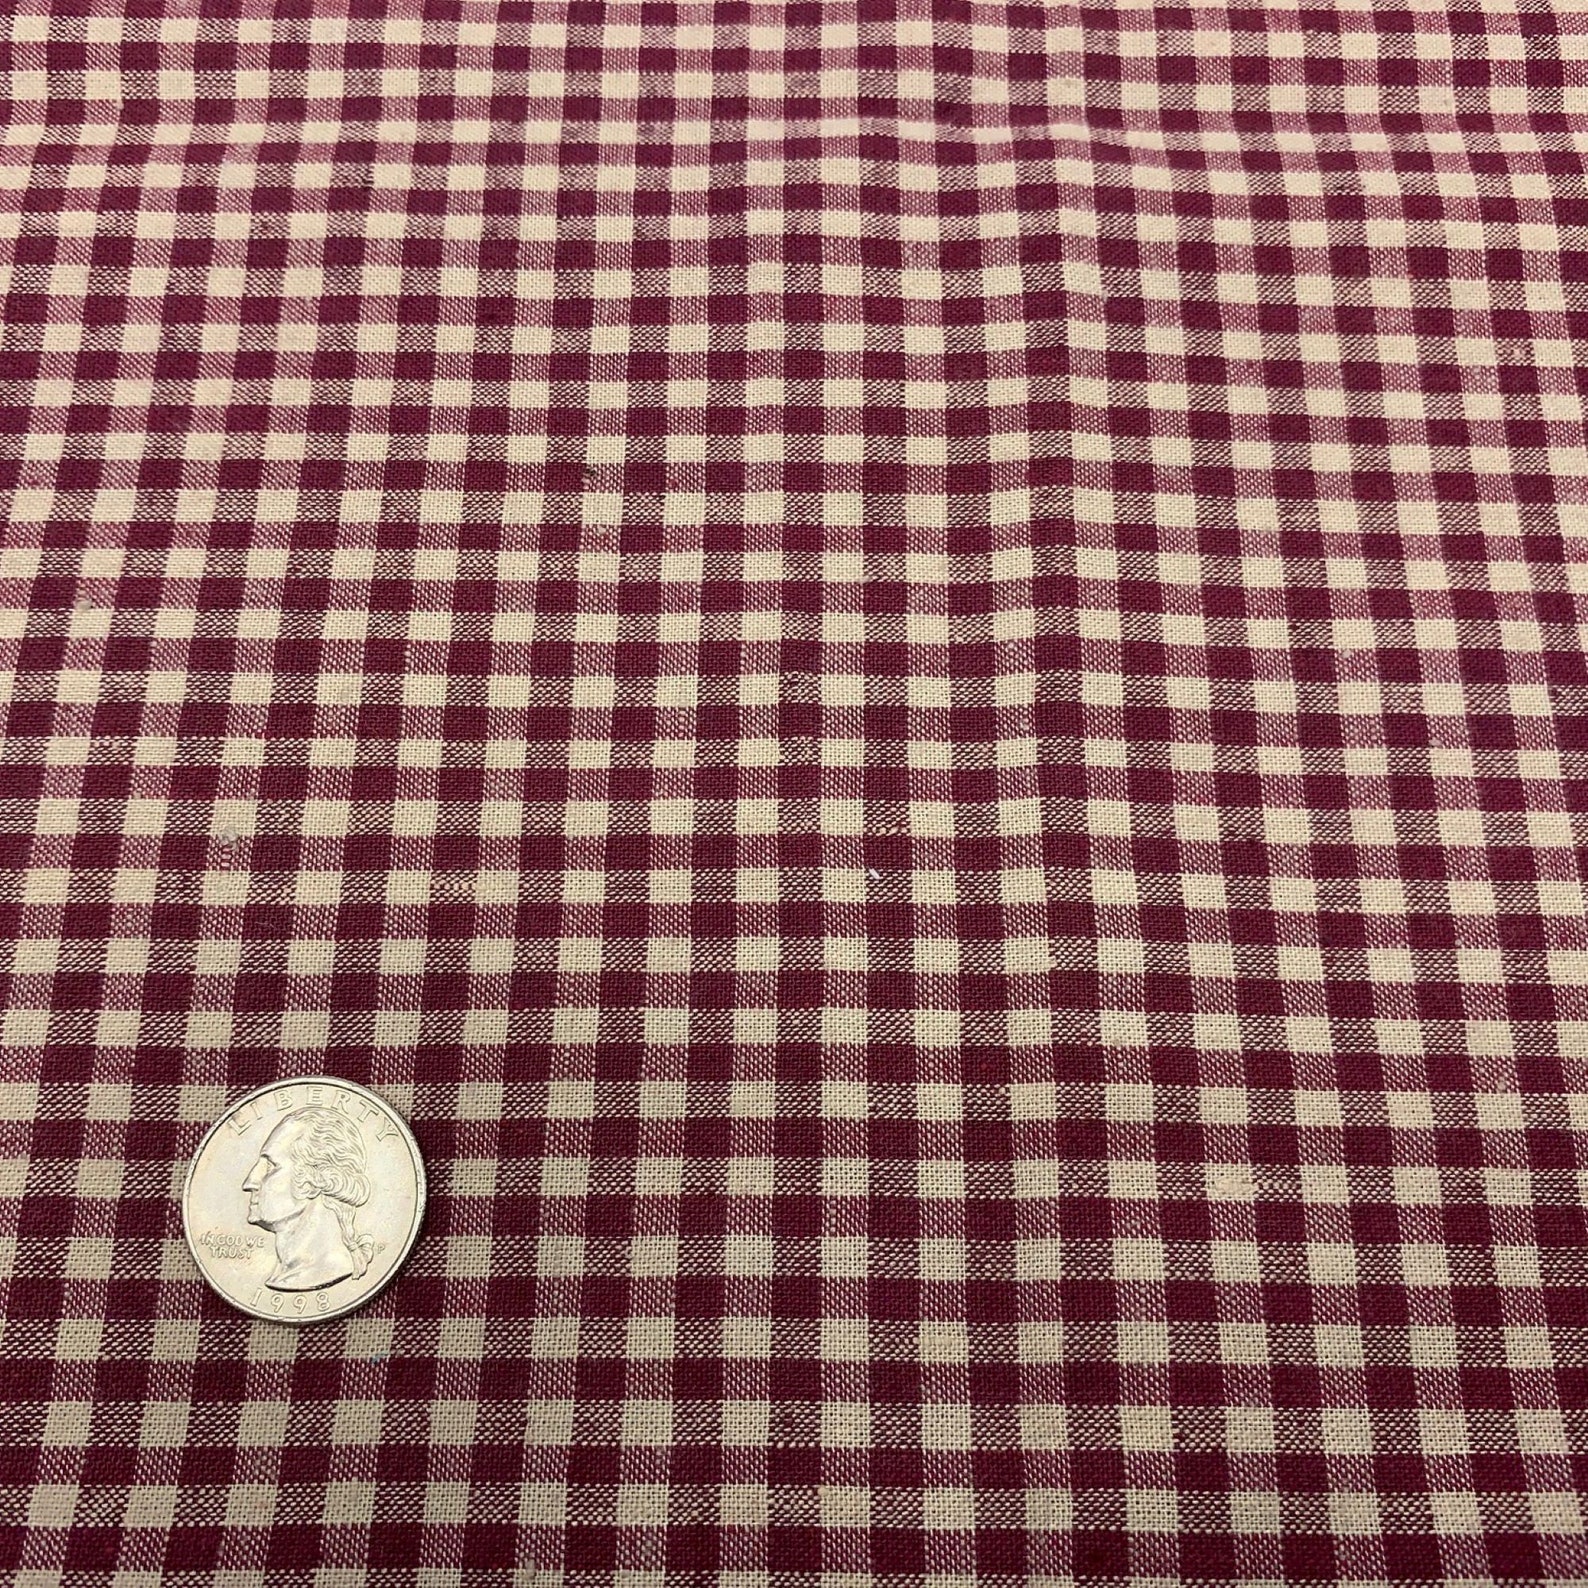 CRANBERRY and CREAM Woven 100% Cotton Fabric 1 15 x | Etsy